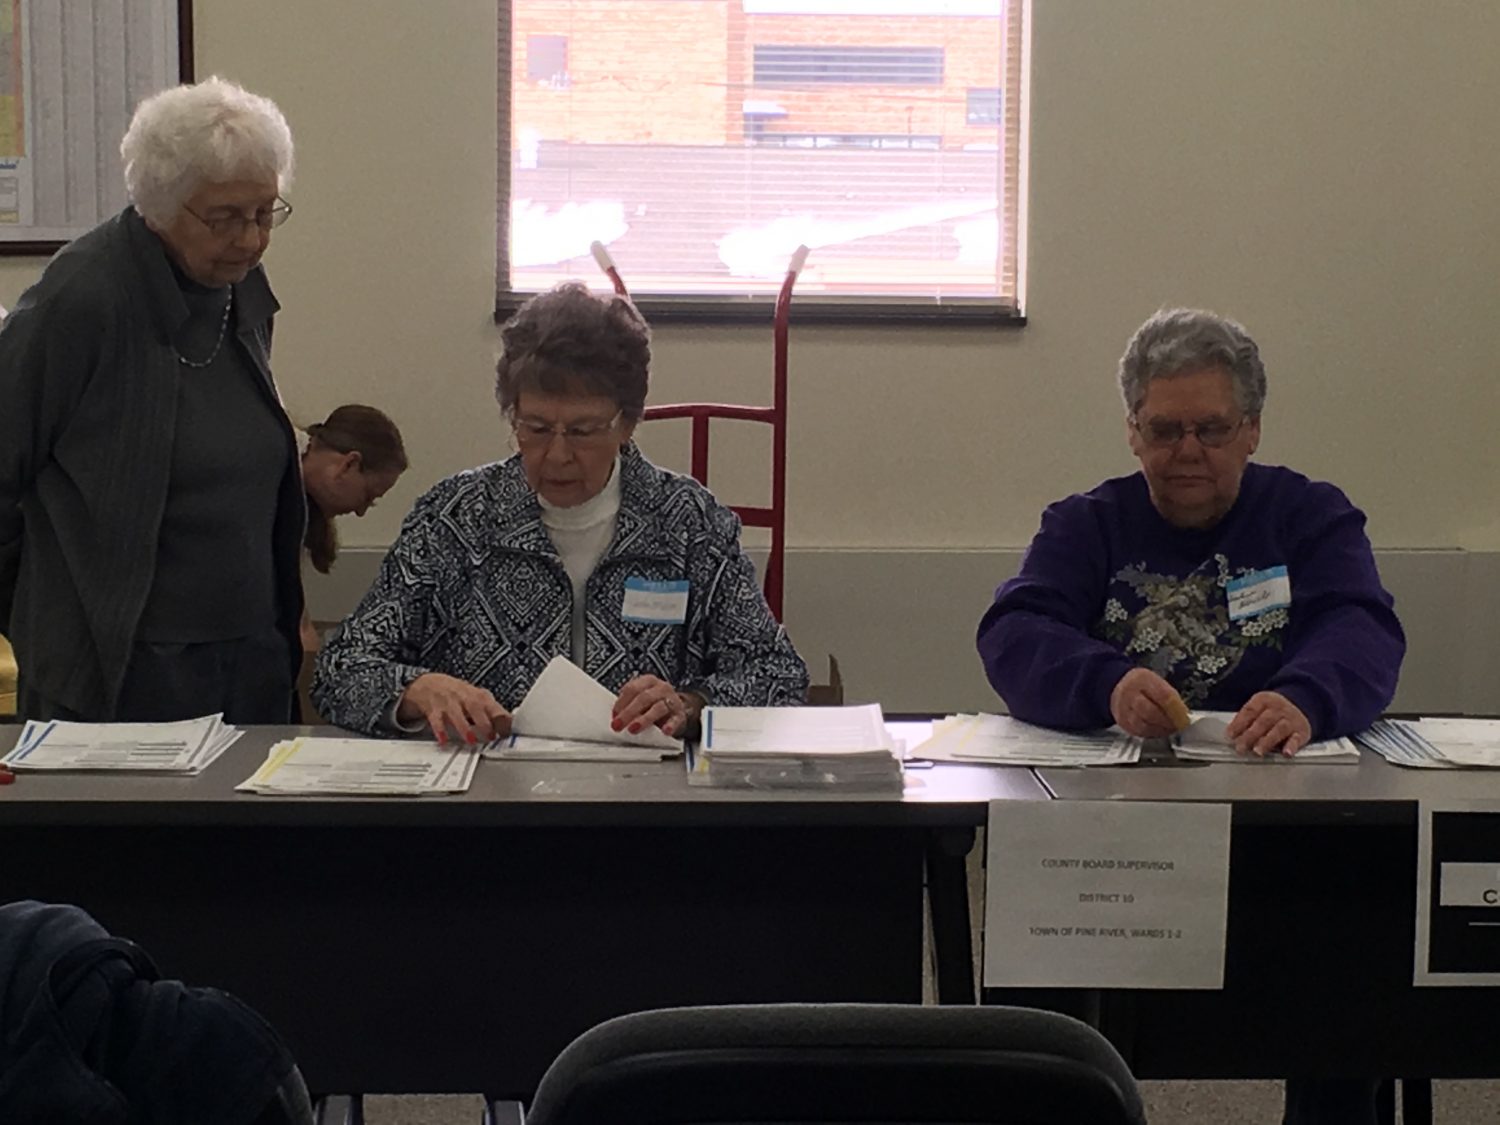 Recounts yield no change in County Supervisory races